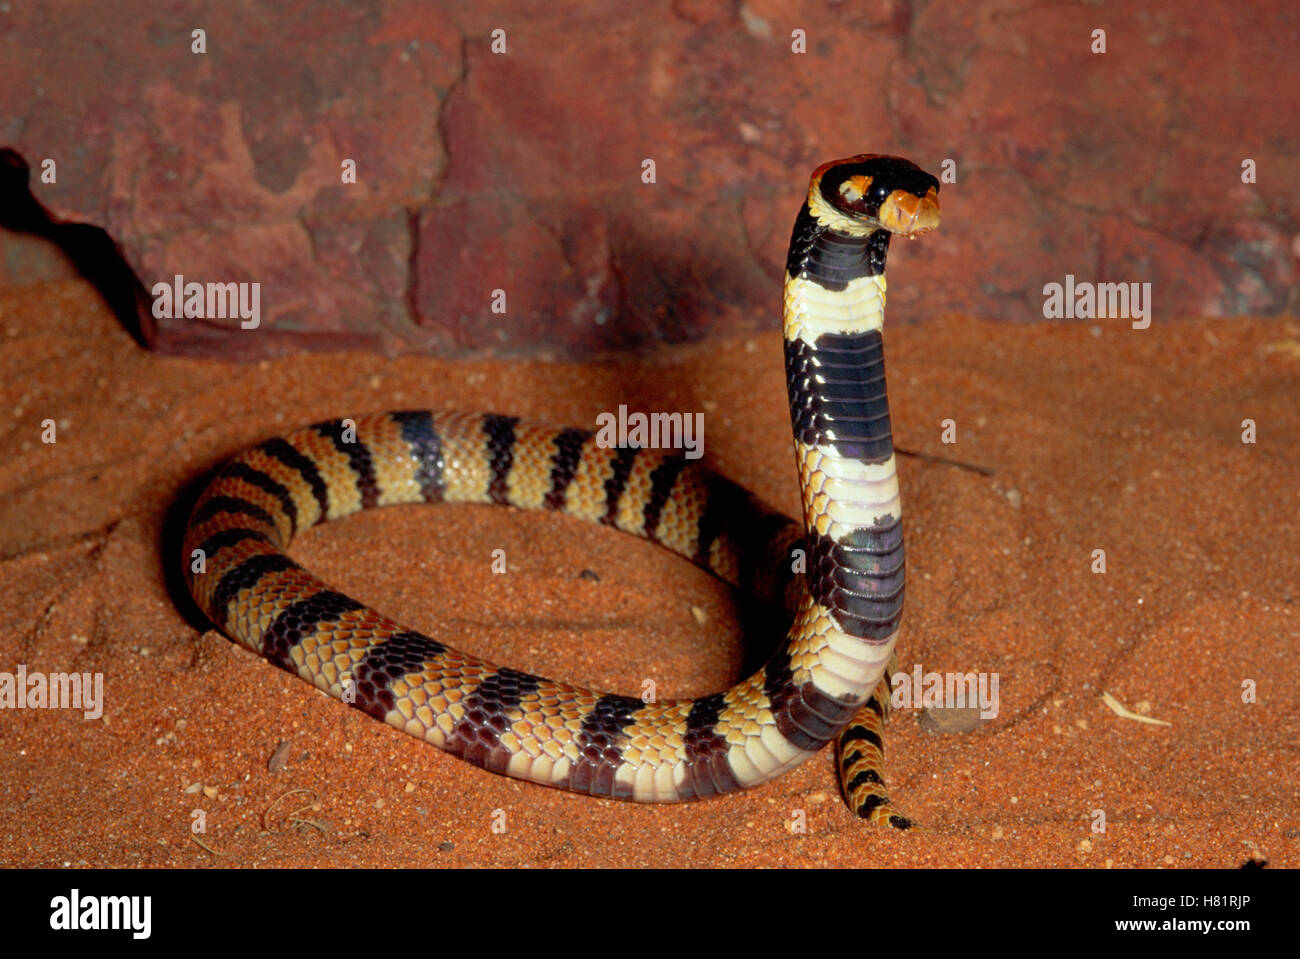 Angolan Coral Snake (Aspidelaps lubricus) defensive display, southern Africa Stock Photo